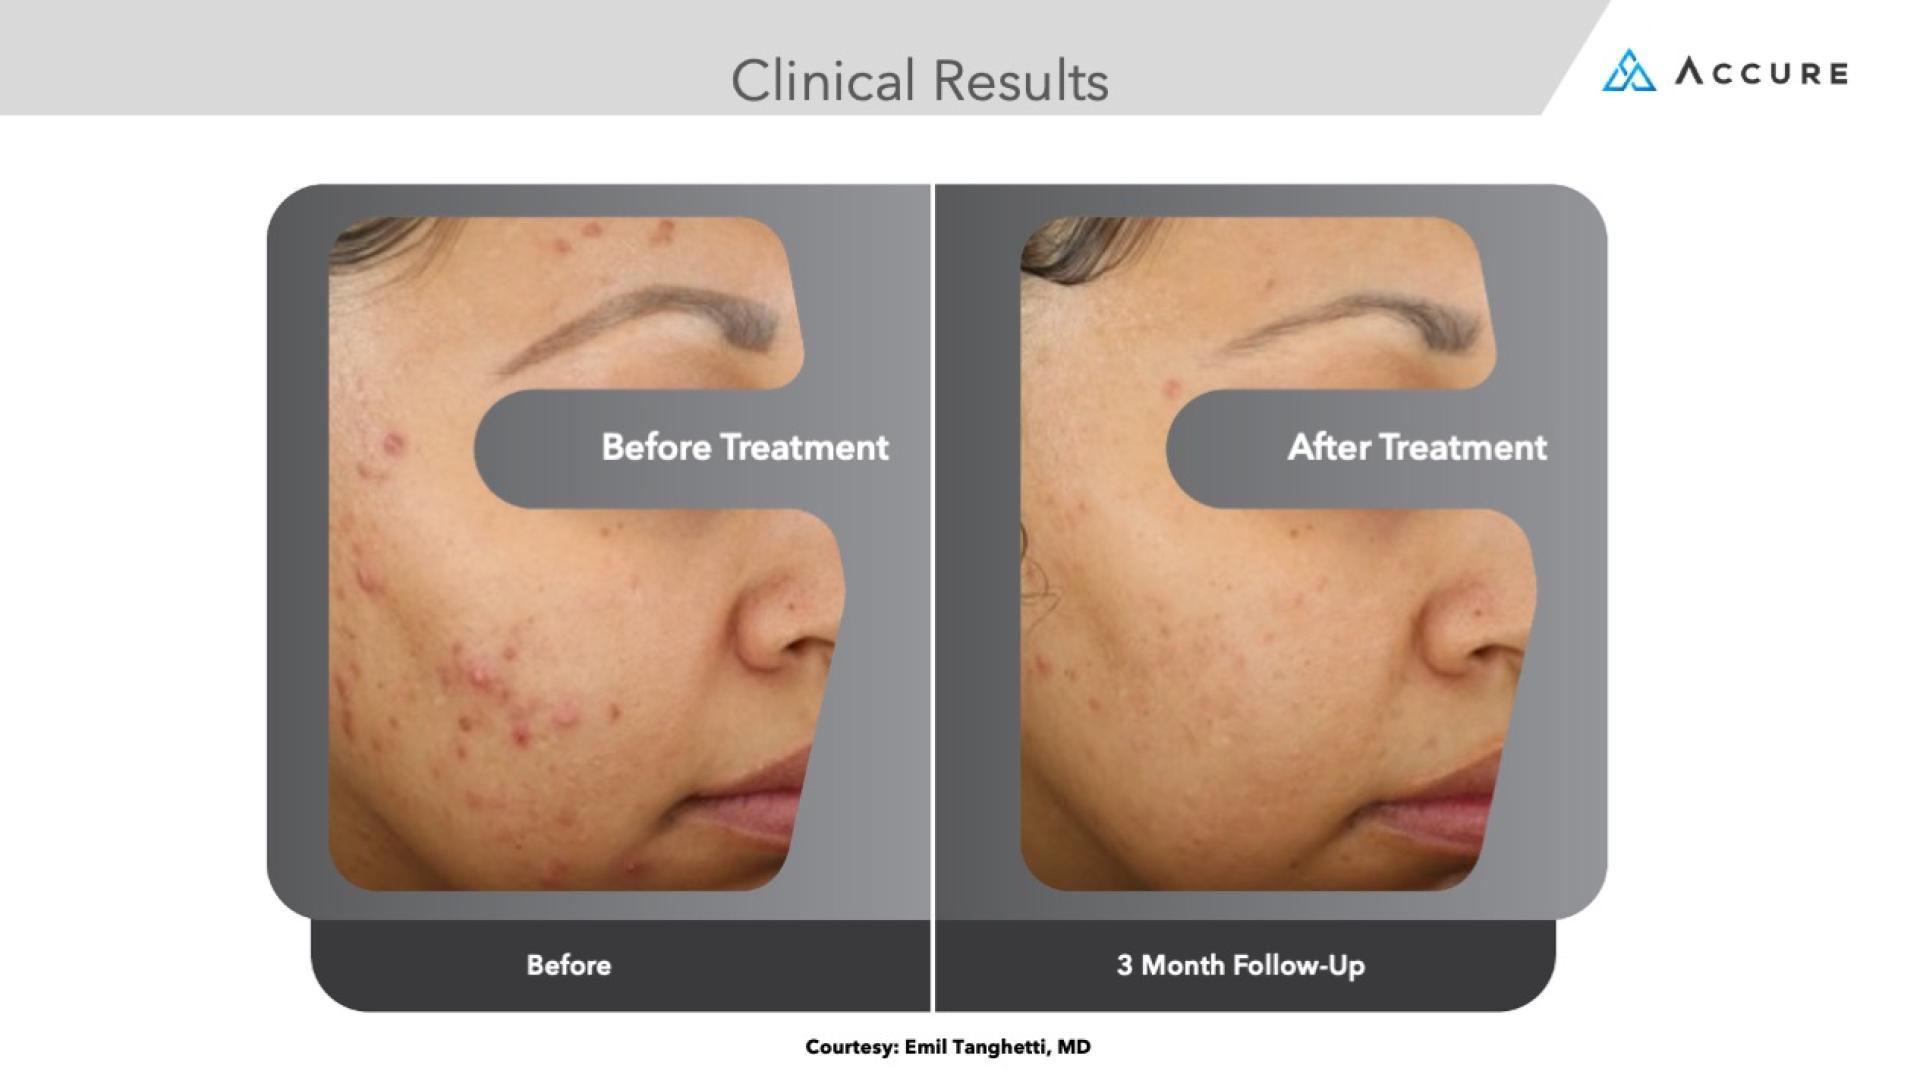 Accure Laser Treatment Acne NYC | Accure Acne Treatment NY